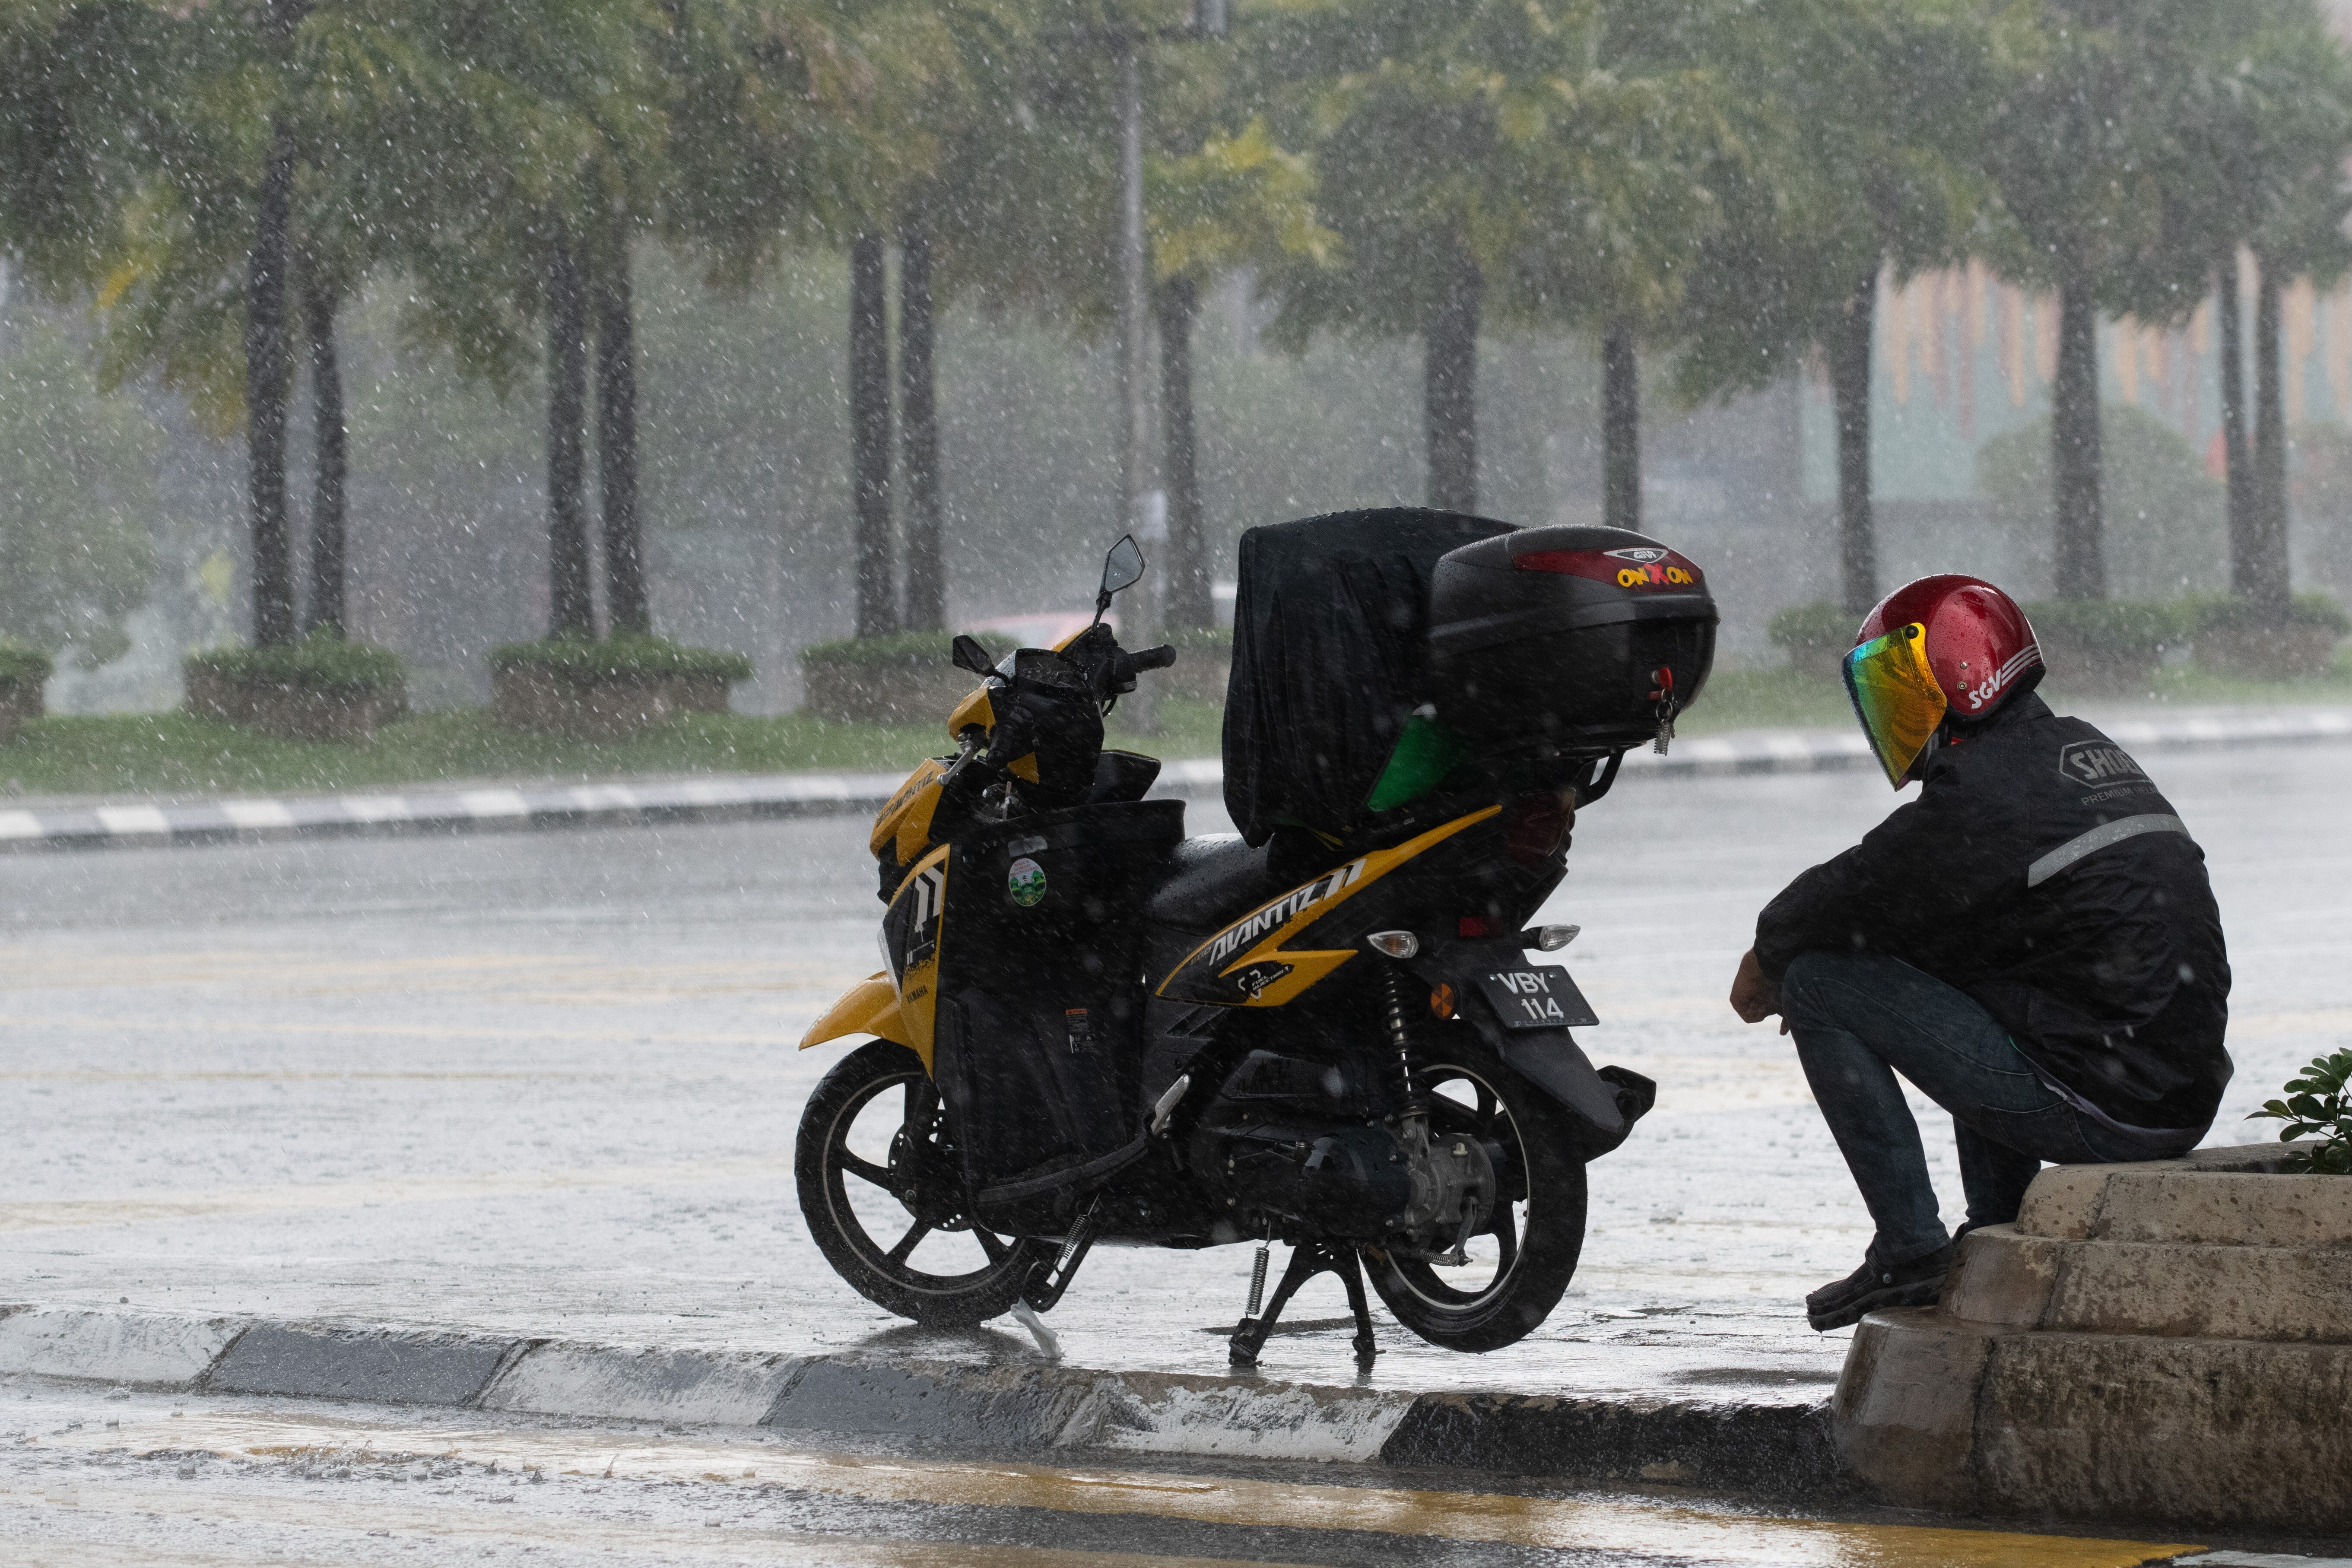 A food delivery rider takes shelter under a bridge while heavy downpour during the Movement Control Order, limiting the activities of people in Malaysia to protect against coronavirus in Kuala Lumpur on April 6. Photo: AFP